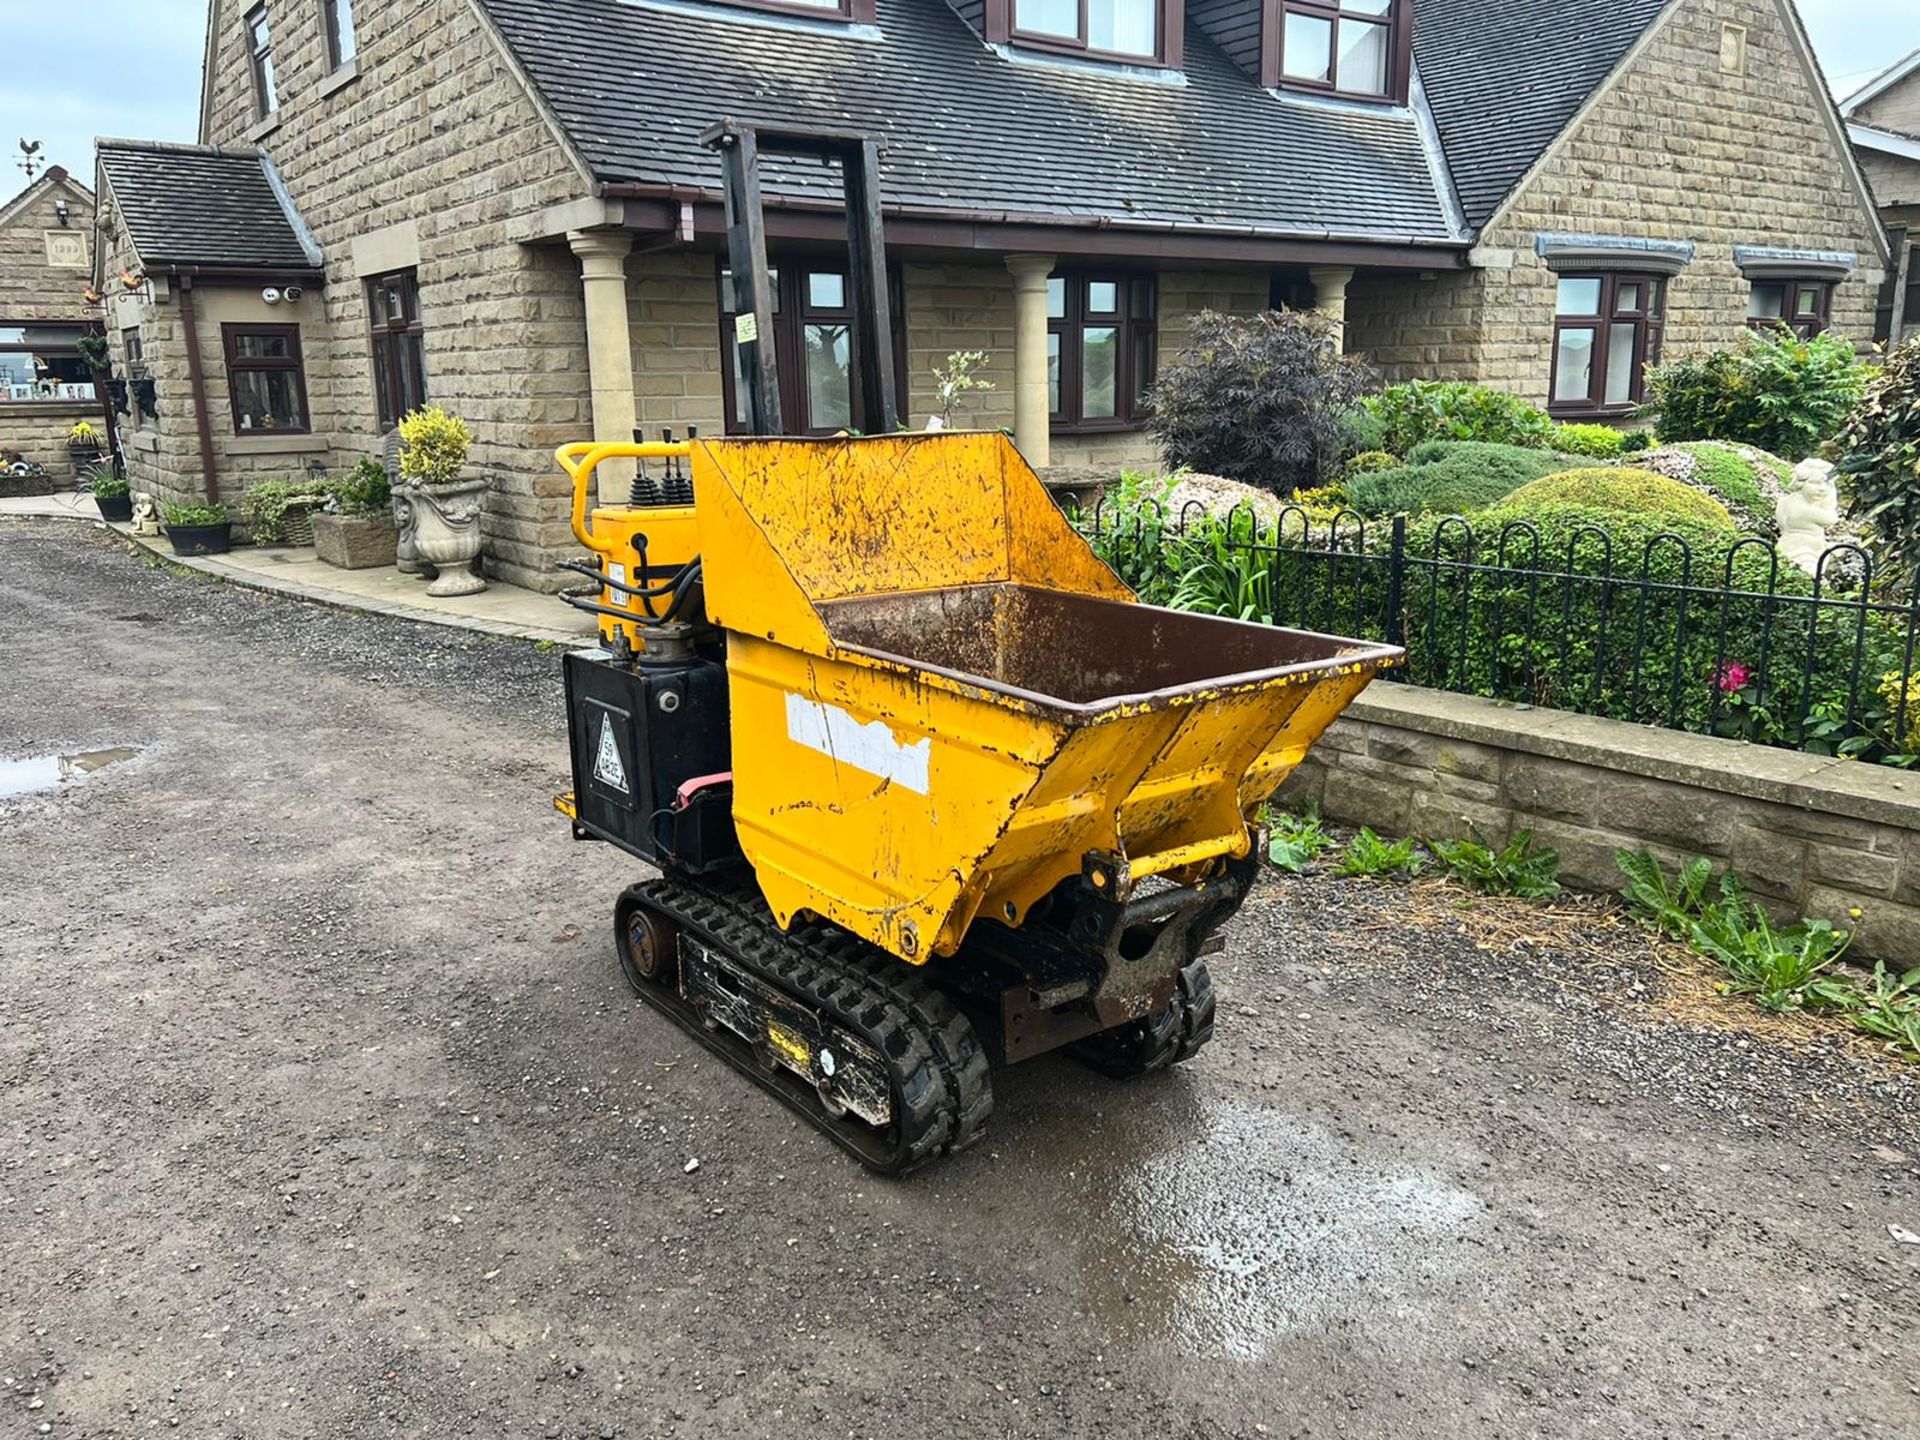 JCB Walk Behind Tracked Dumper, 2 SPEED TRACKING, ELECTRIC OR PULL START *PLUS VAT* - Image 6 of 18